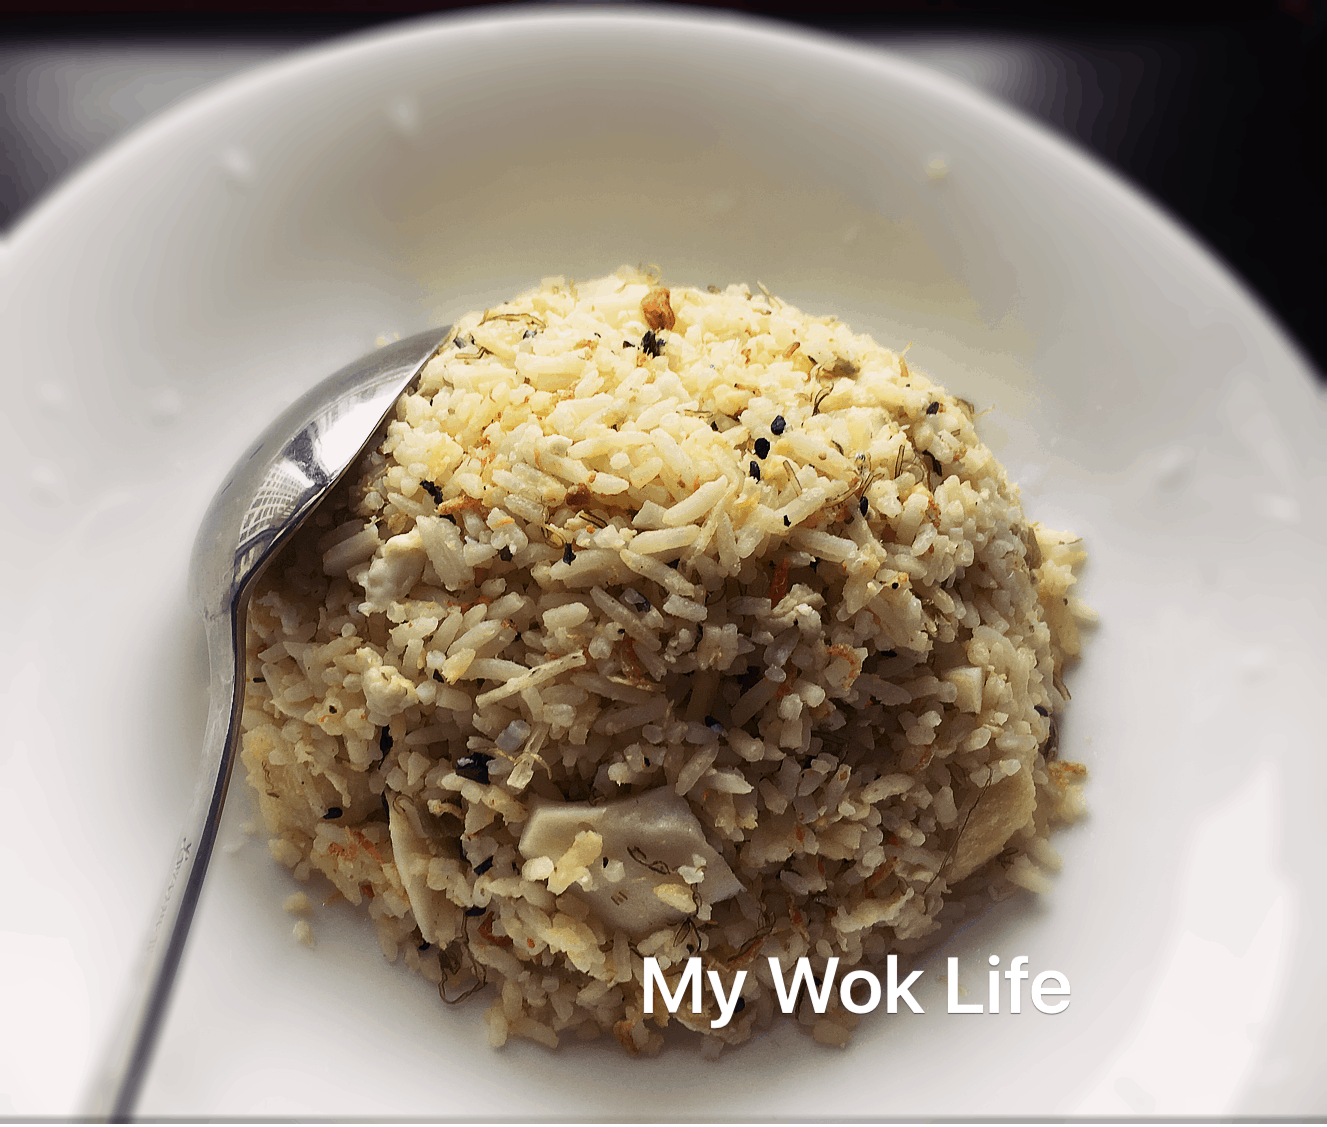 My Wok Life Cooking Blog Golden Egg Fried Rice with Japanese Rice Toppings (黄金蛋炒饭)